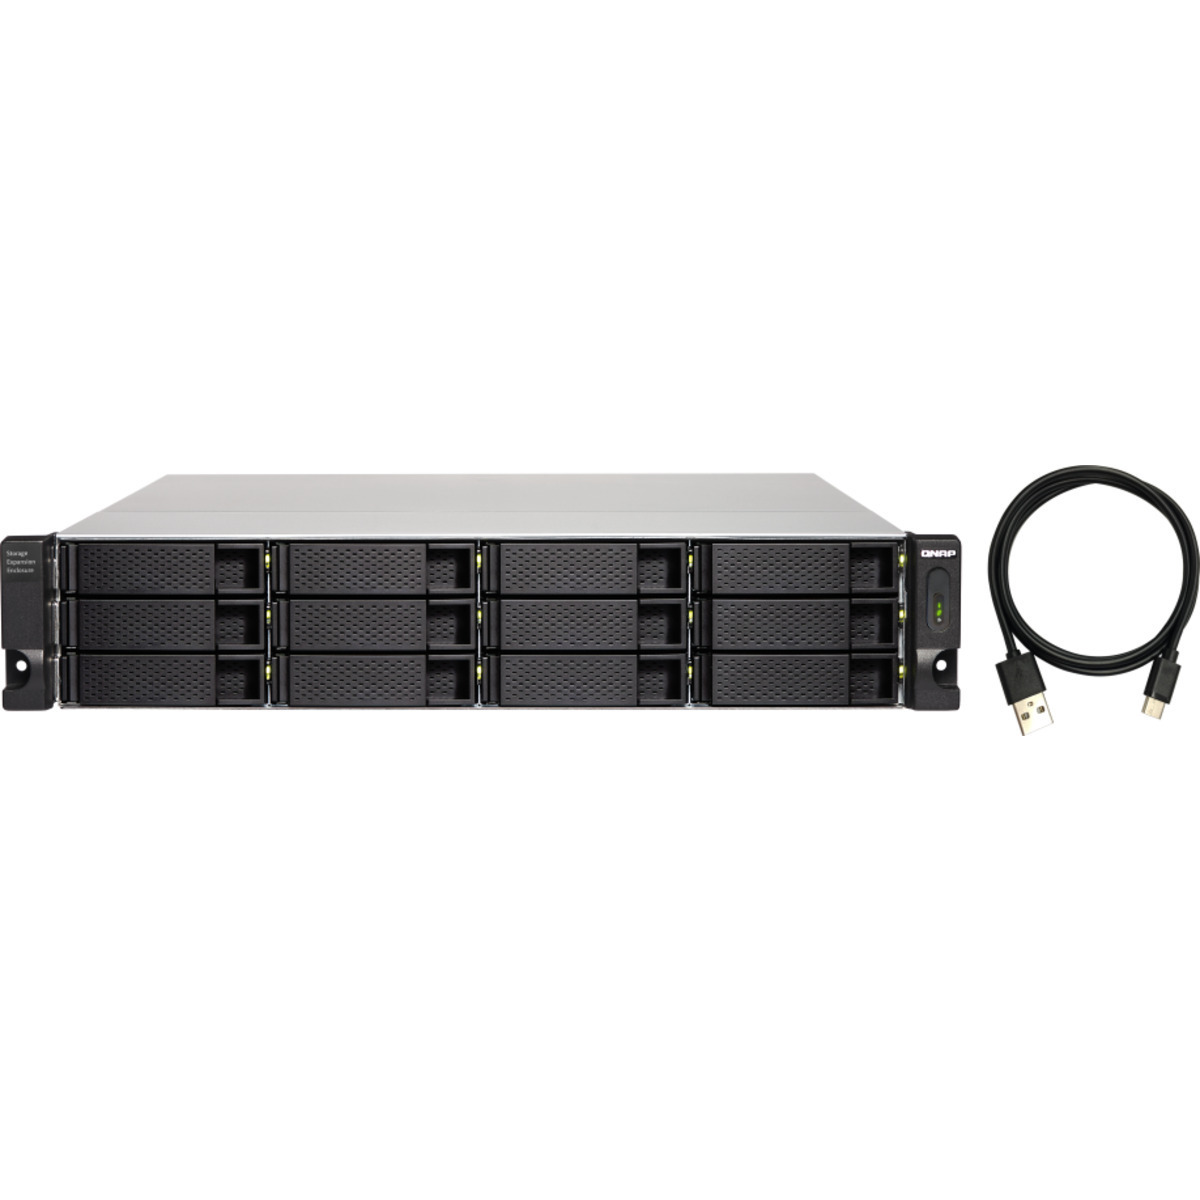 QNAP TL-R1200C-RP External Expansion Drive 144tb 12-Bay RackMount Multimedia / Power User / Business Expansion Enclosure 12x12tb Seagate IronWolf Pro ST12000NT001 3.5 7200rpm SATA 6Gb/s HDD NAS Class Drives Installed - Burn-In Tested - ON SALE TL-R1200C-RP External Expansion Drive